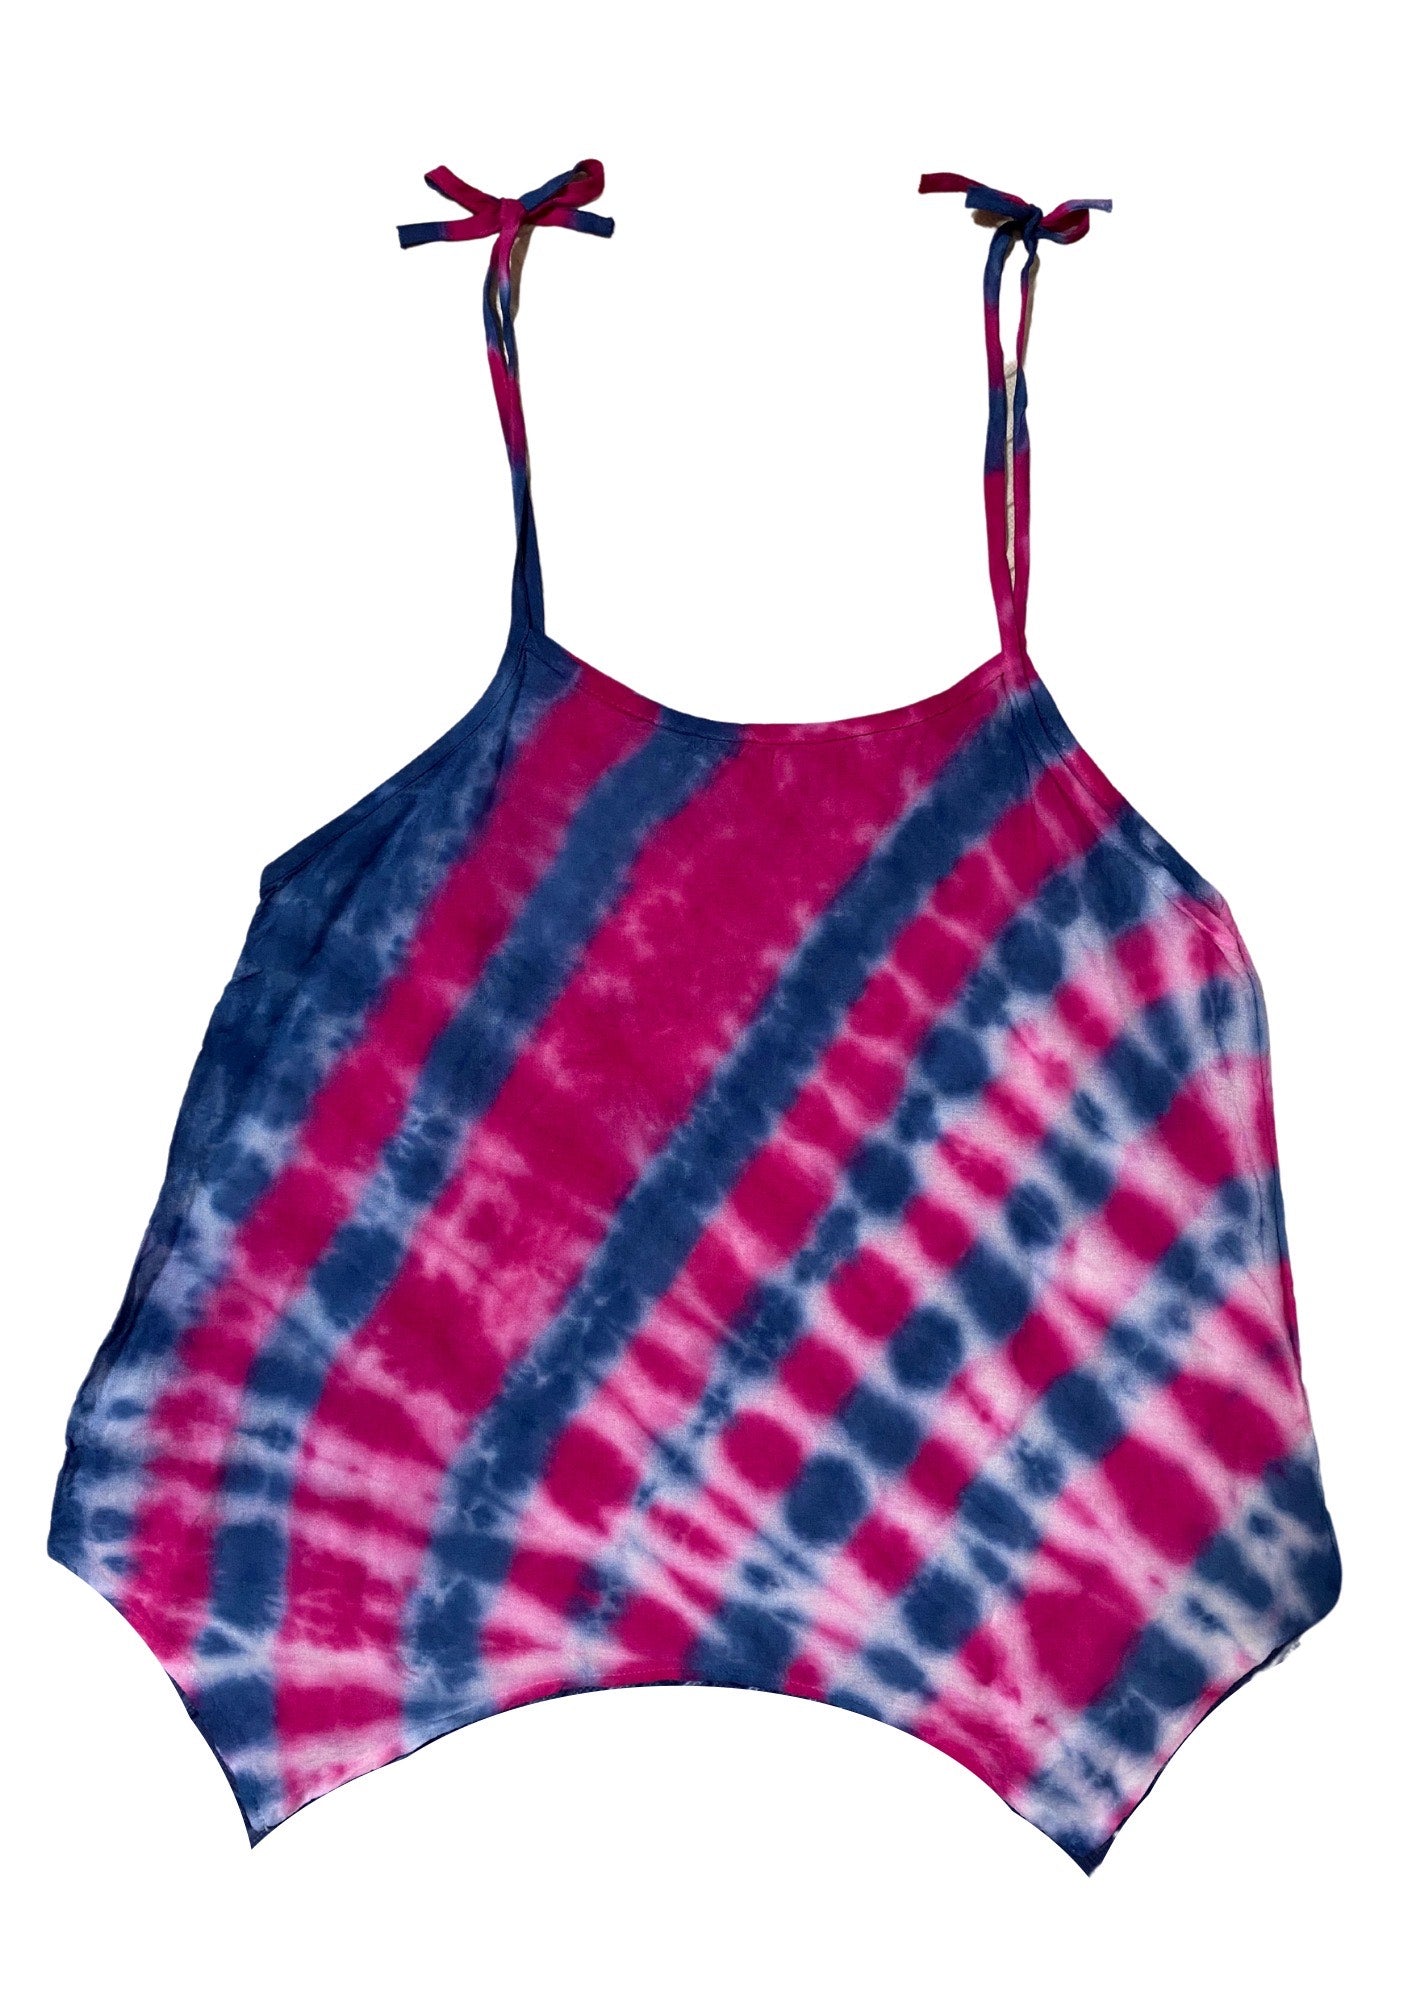 Cami Camisole Teen & Women, One Size Free Size Fit 0 to 8, Handmade Tie Dyed - Magenta Pink